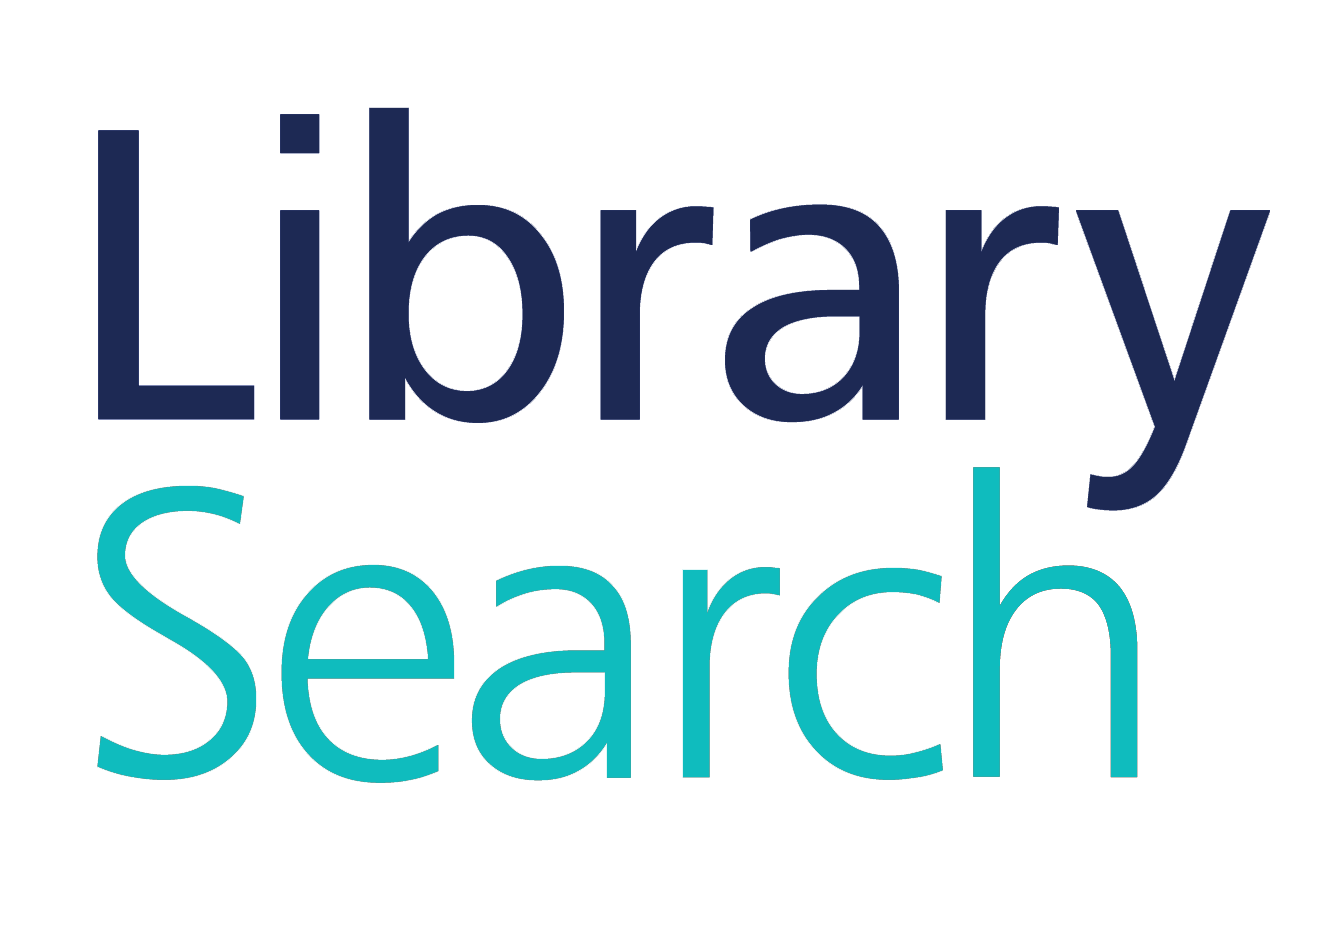 Help us to improve LibrarySearch